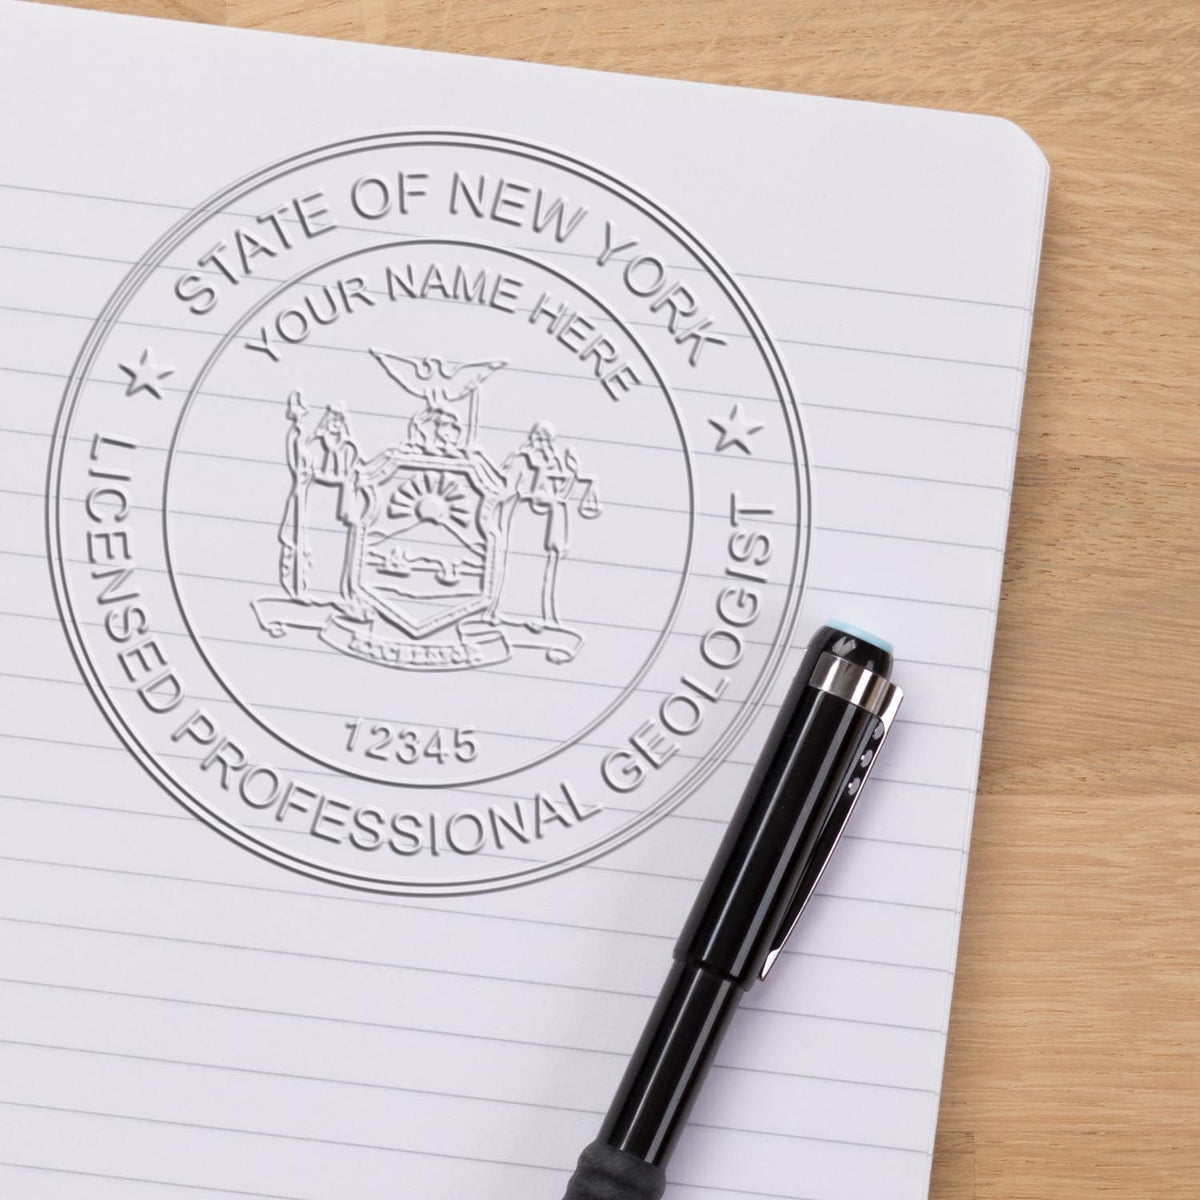 A photograph of the Soft New York Professional Geologist Seal stamp impression reveals a vivid, professional image of the on paper.